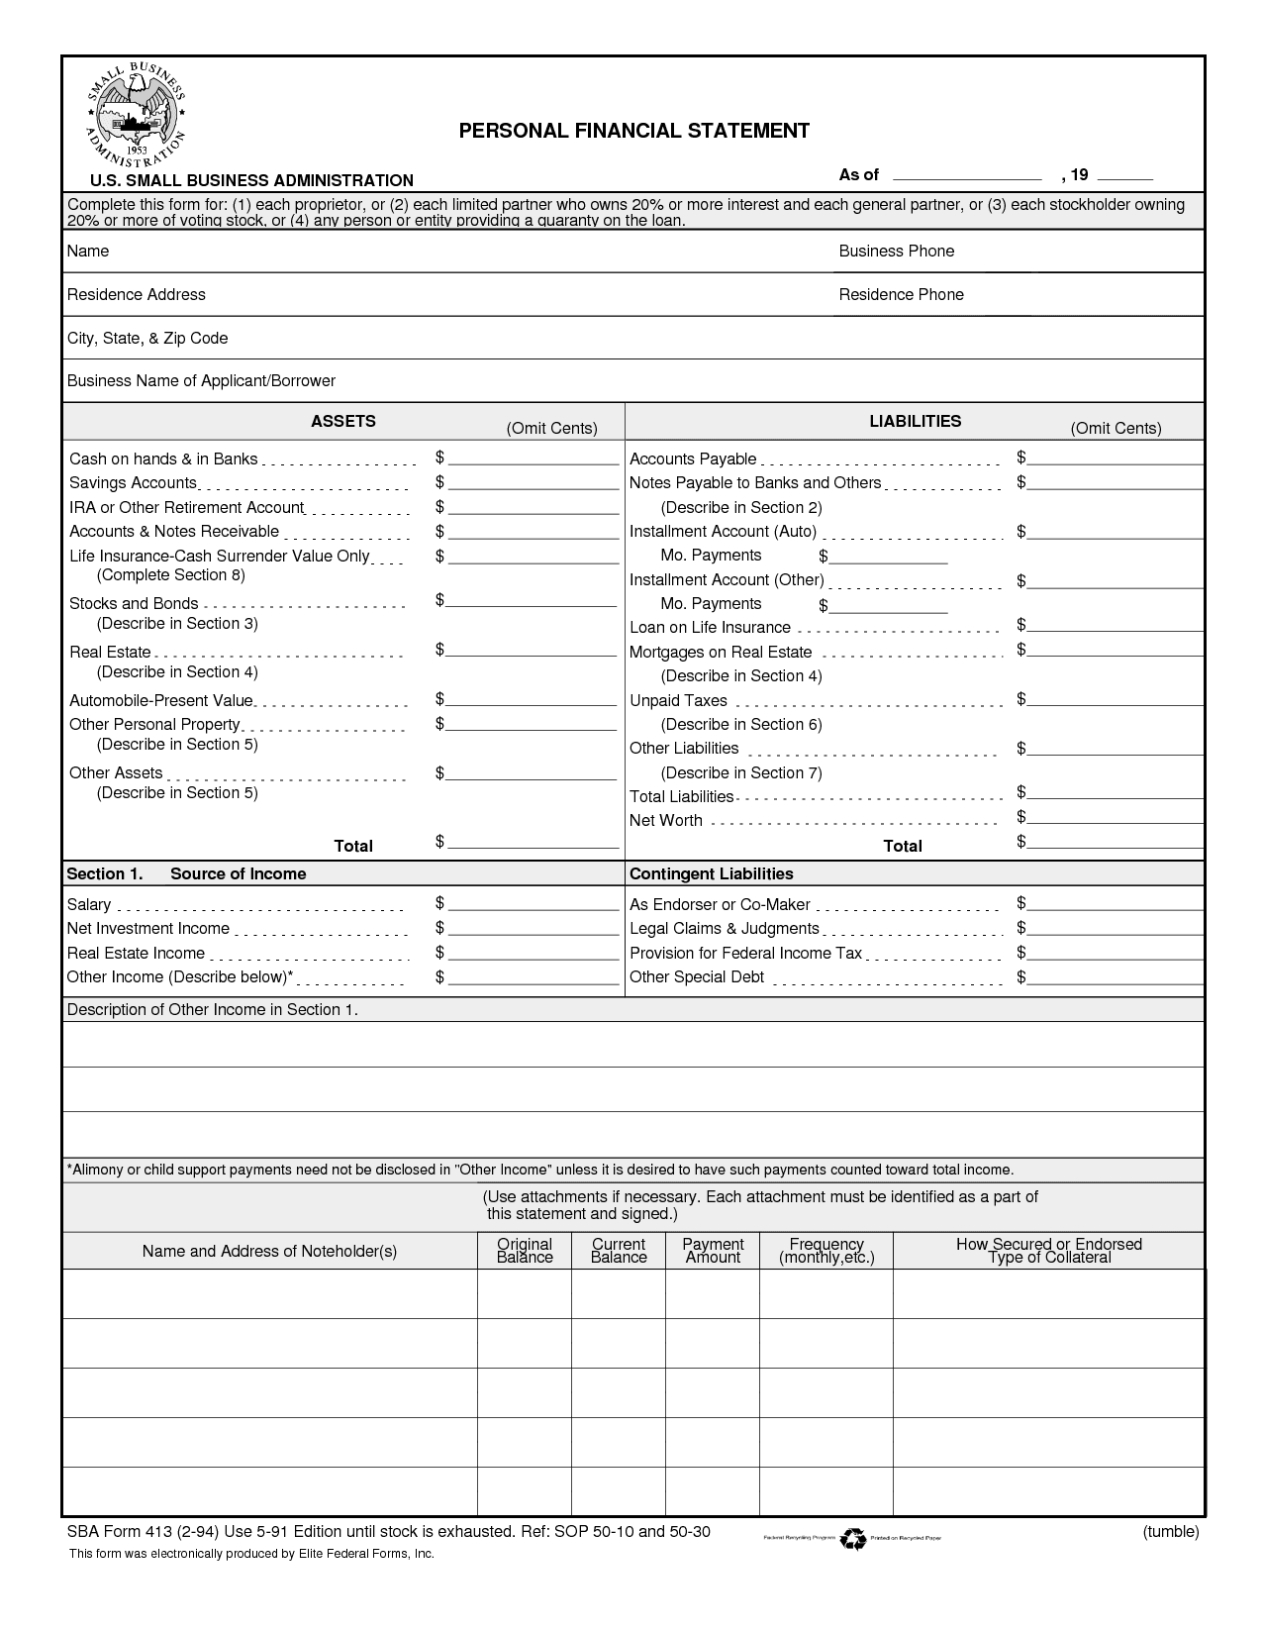 Sample Income Statement For Small Business — Excelxo With Financial Statement For Small Business Template